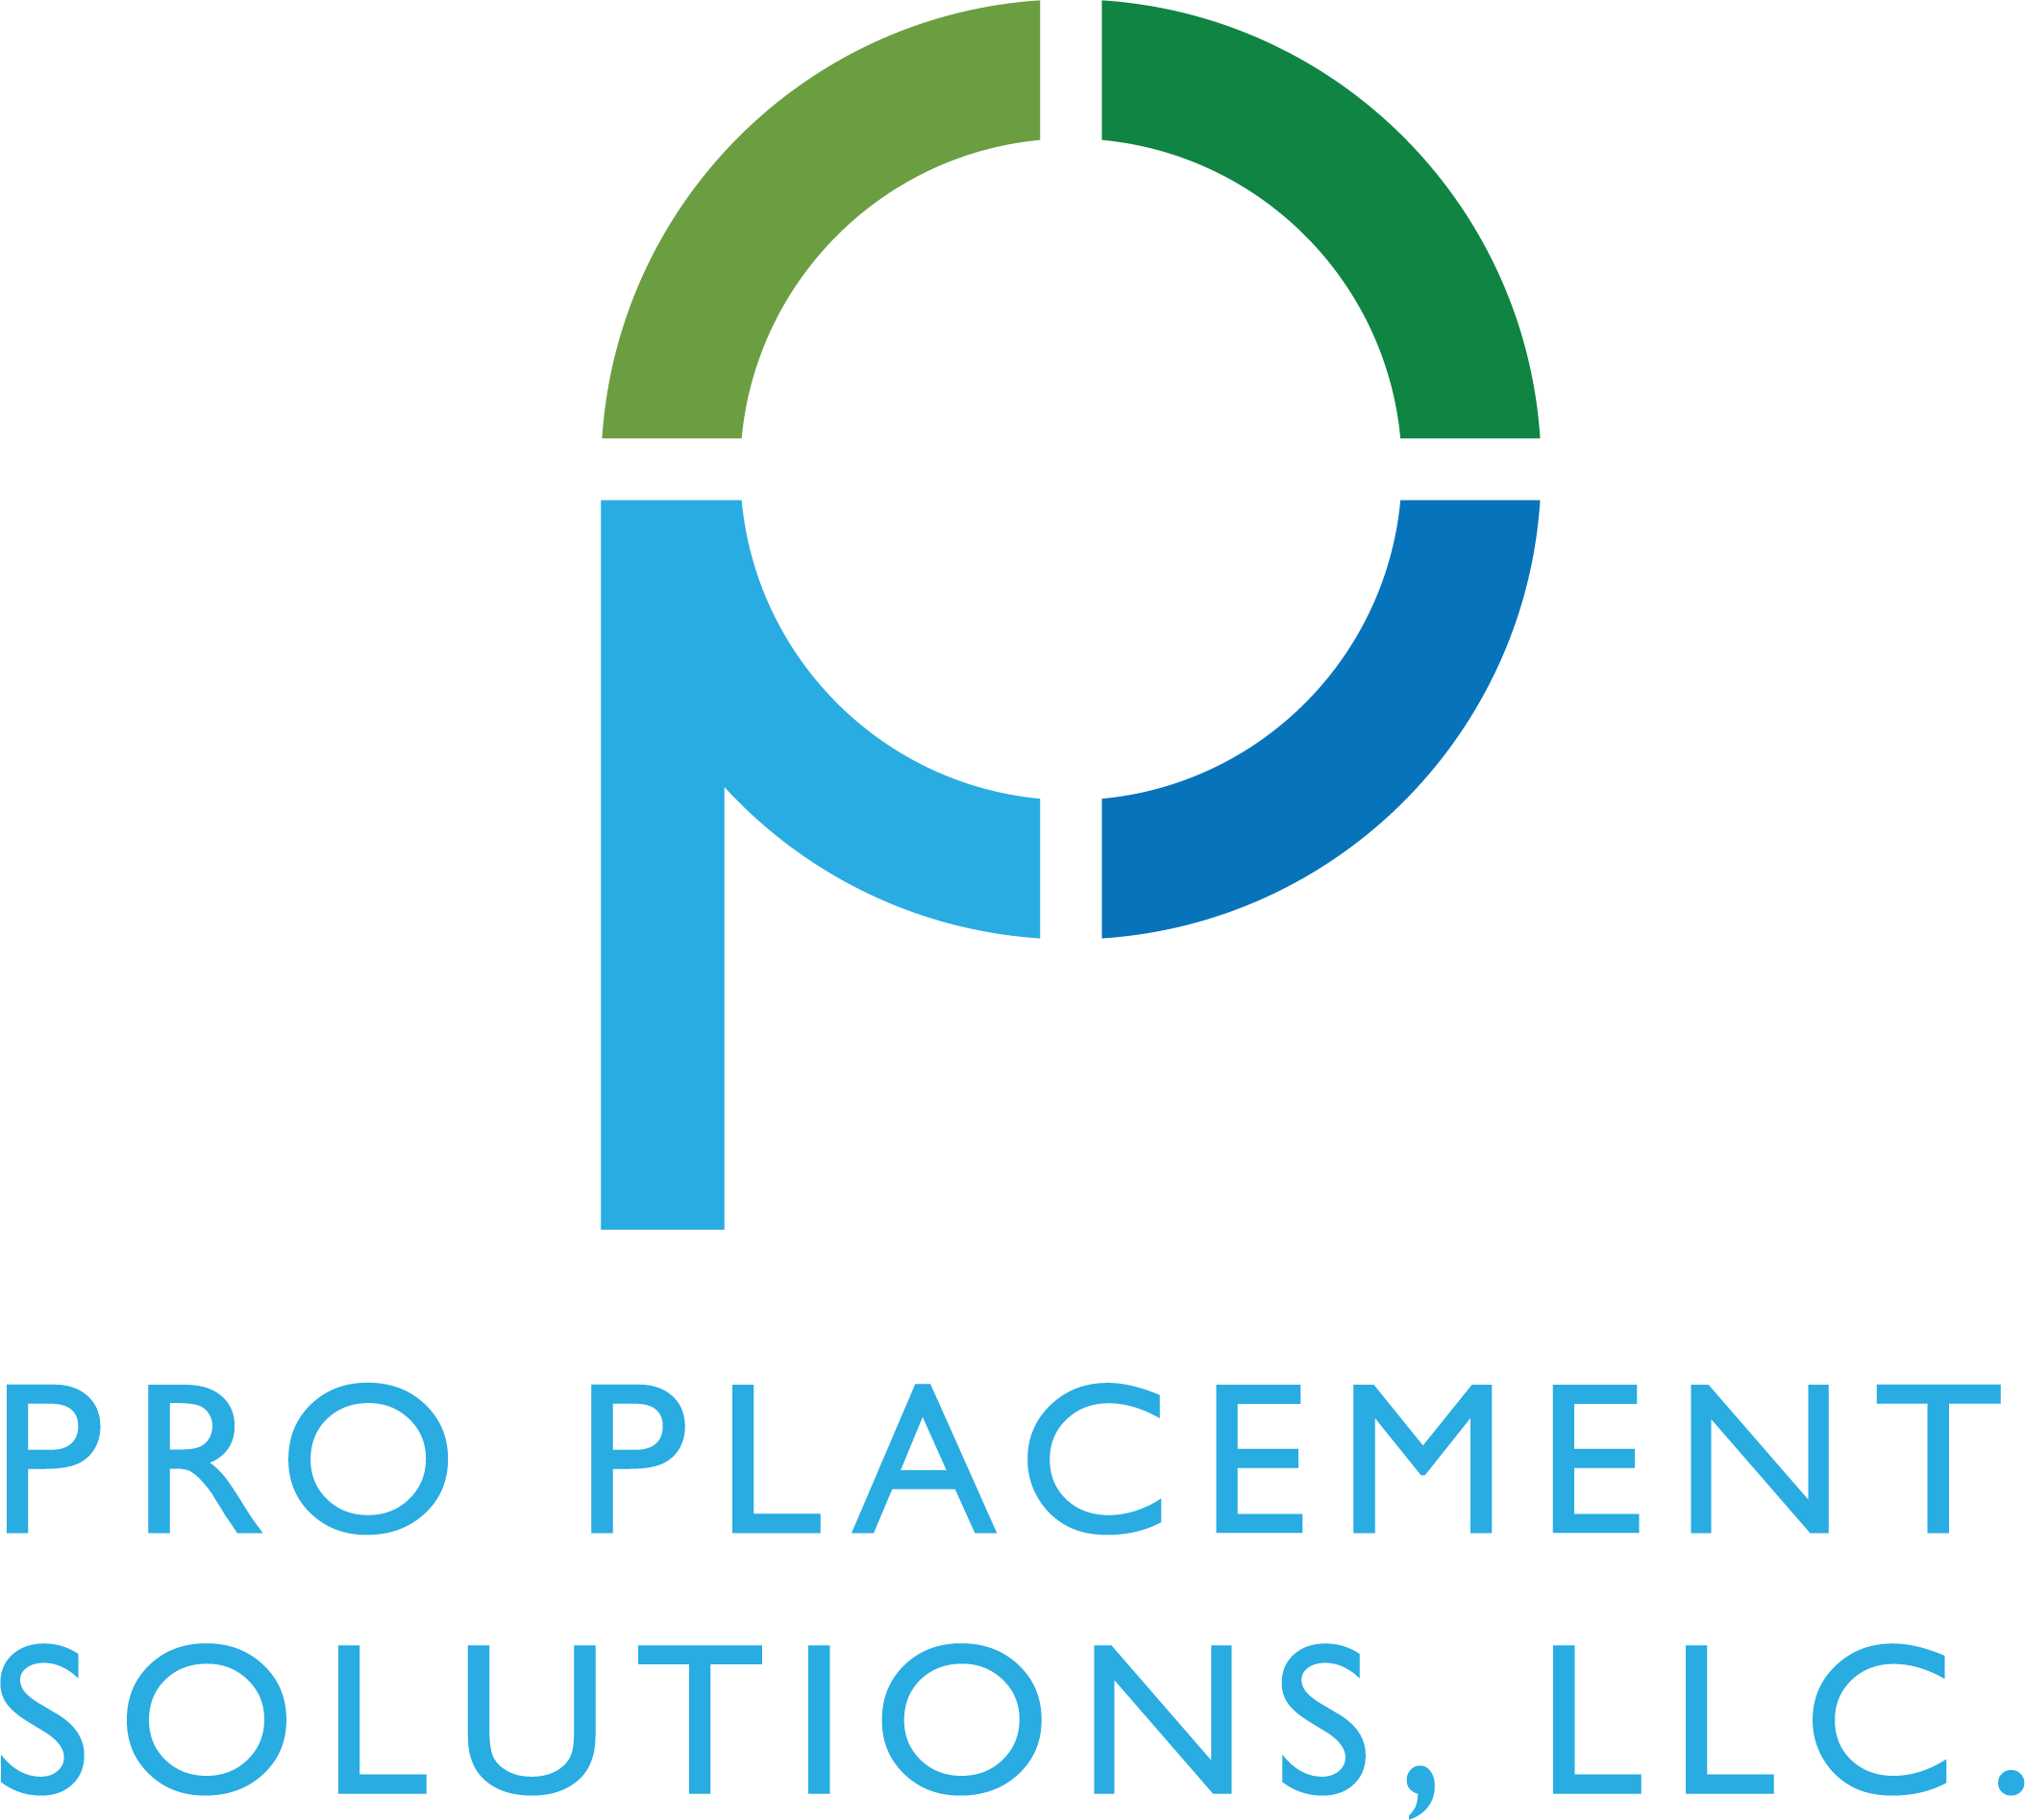 PRO PLACEMENT SOLUTIONS